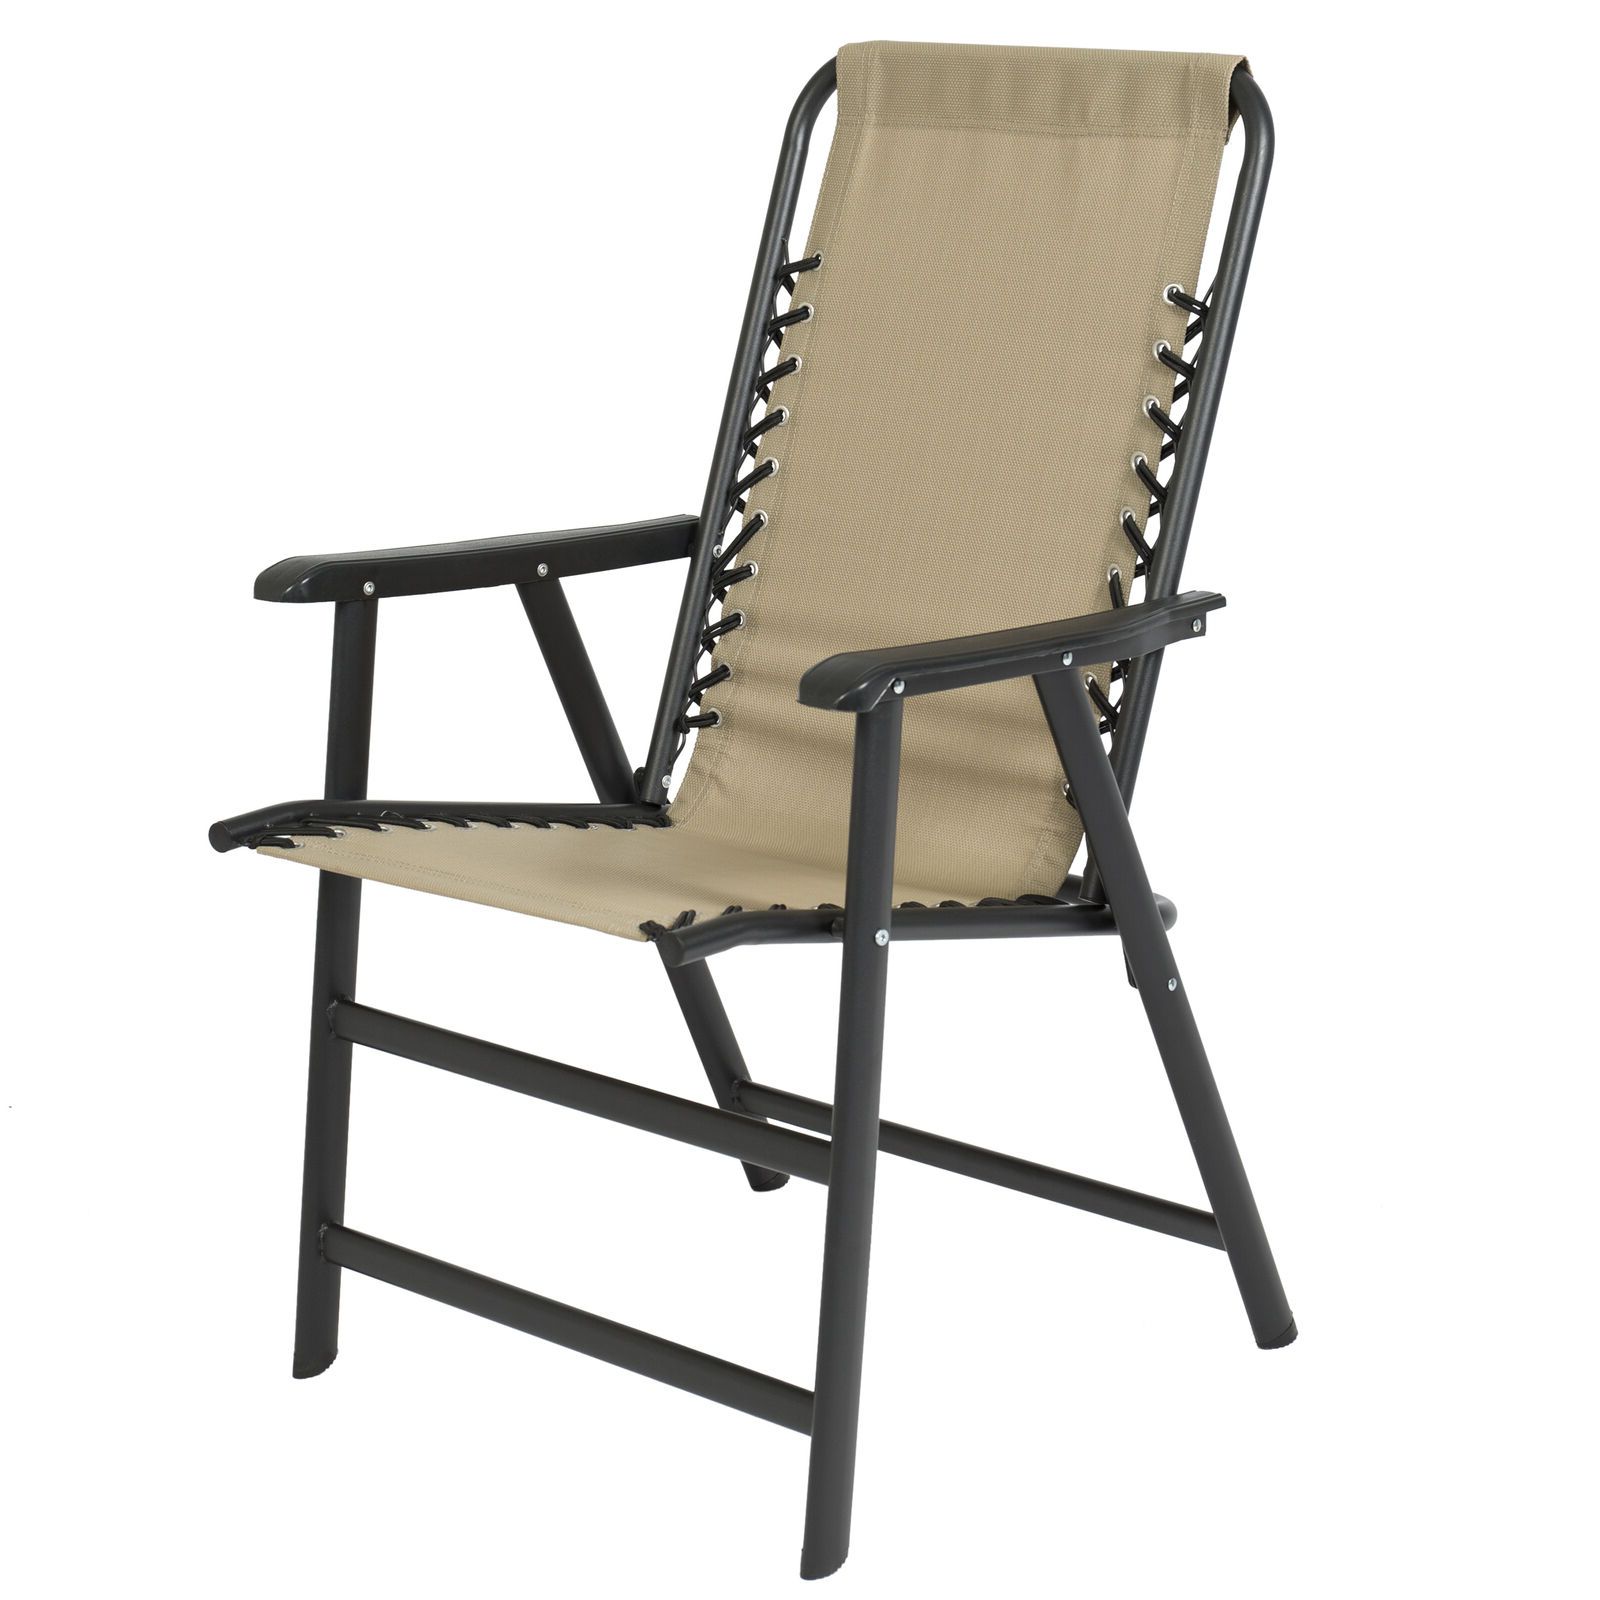 Caravan Sportsbeige Zero Gravity Chairs For Fashionable Best Choice Patio Lounge Suspension Folding Chair Outdoor Sport Beige, For  Sale Online (View 21 of 25)